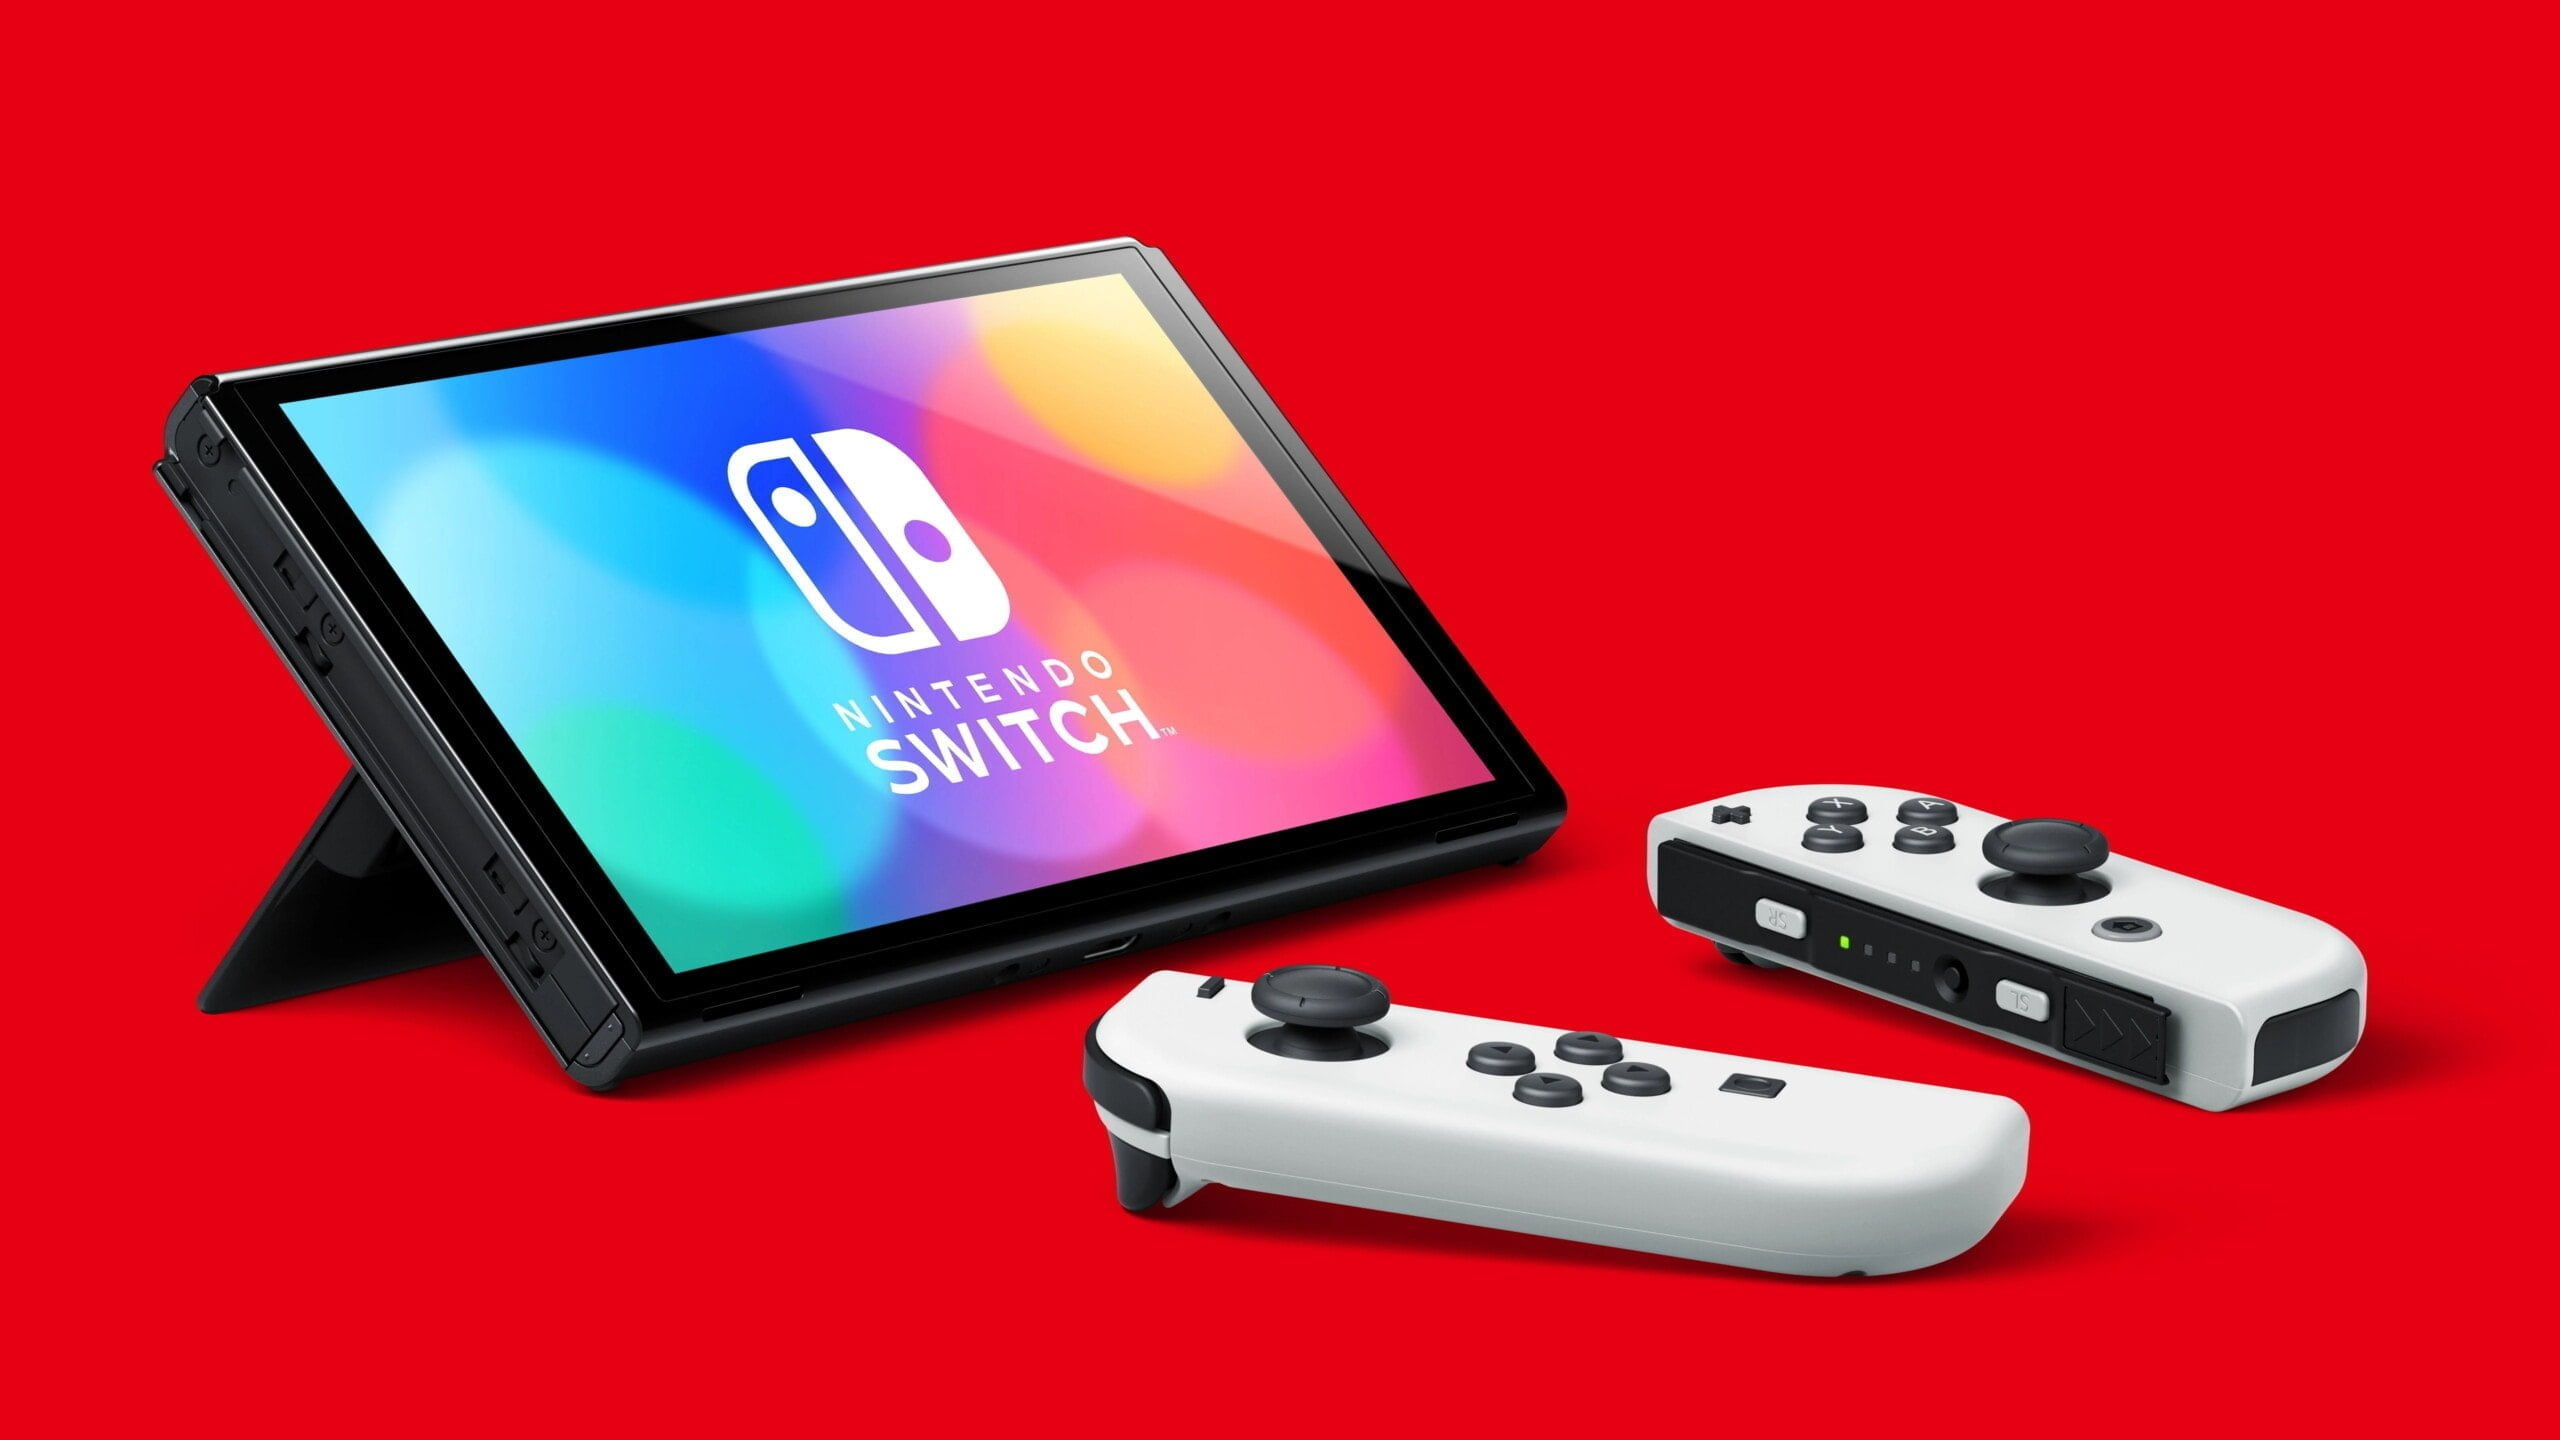 2021 Nintendo Switch (OLED model) vs 2017 Nintendo Switch – What’s different other than the larger 7-inch OLED display?